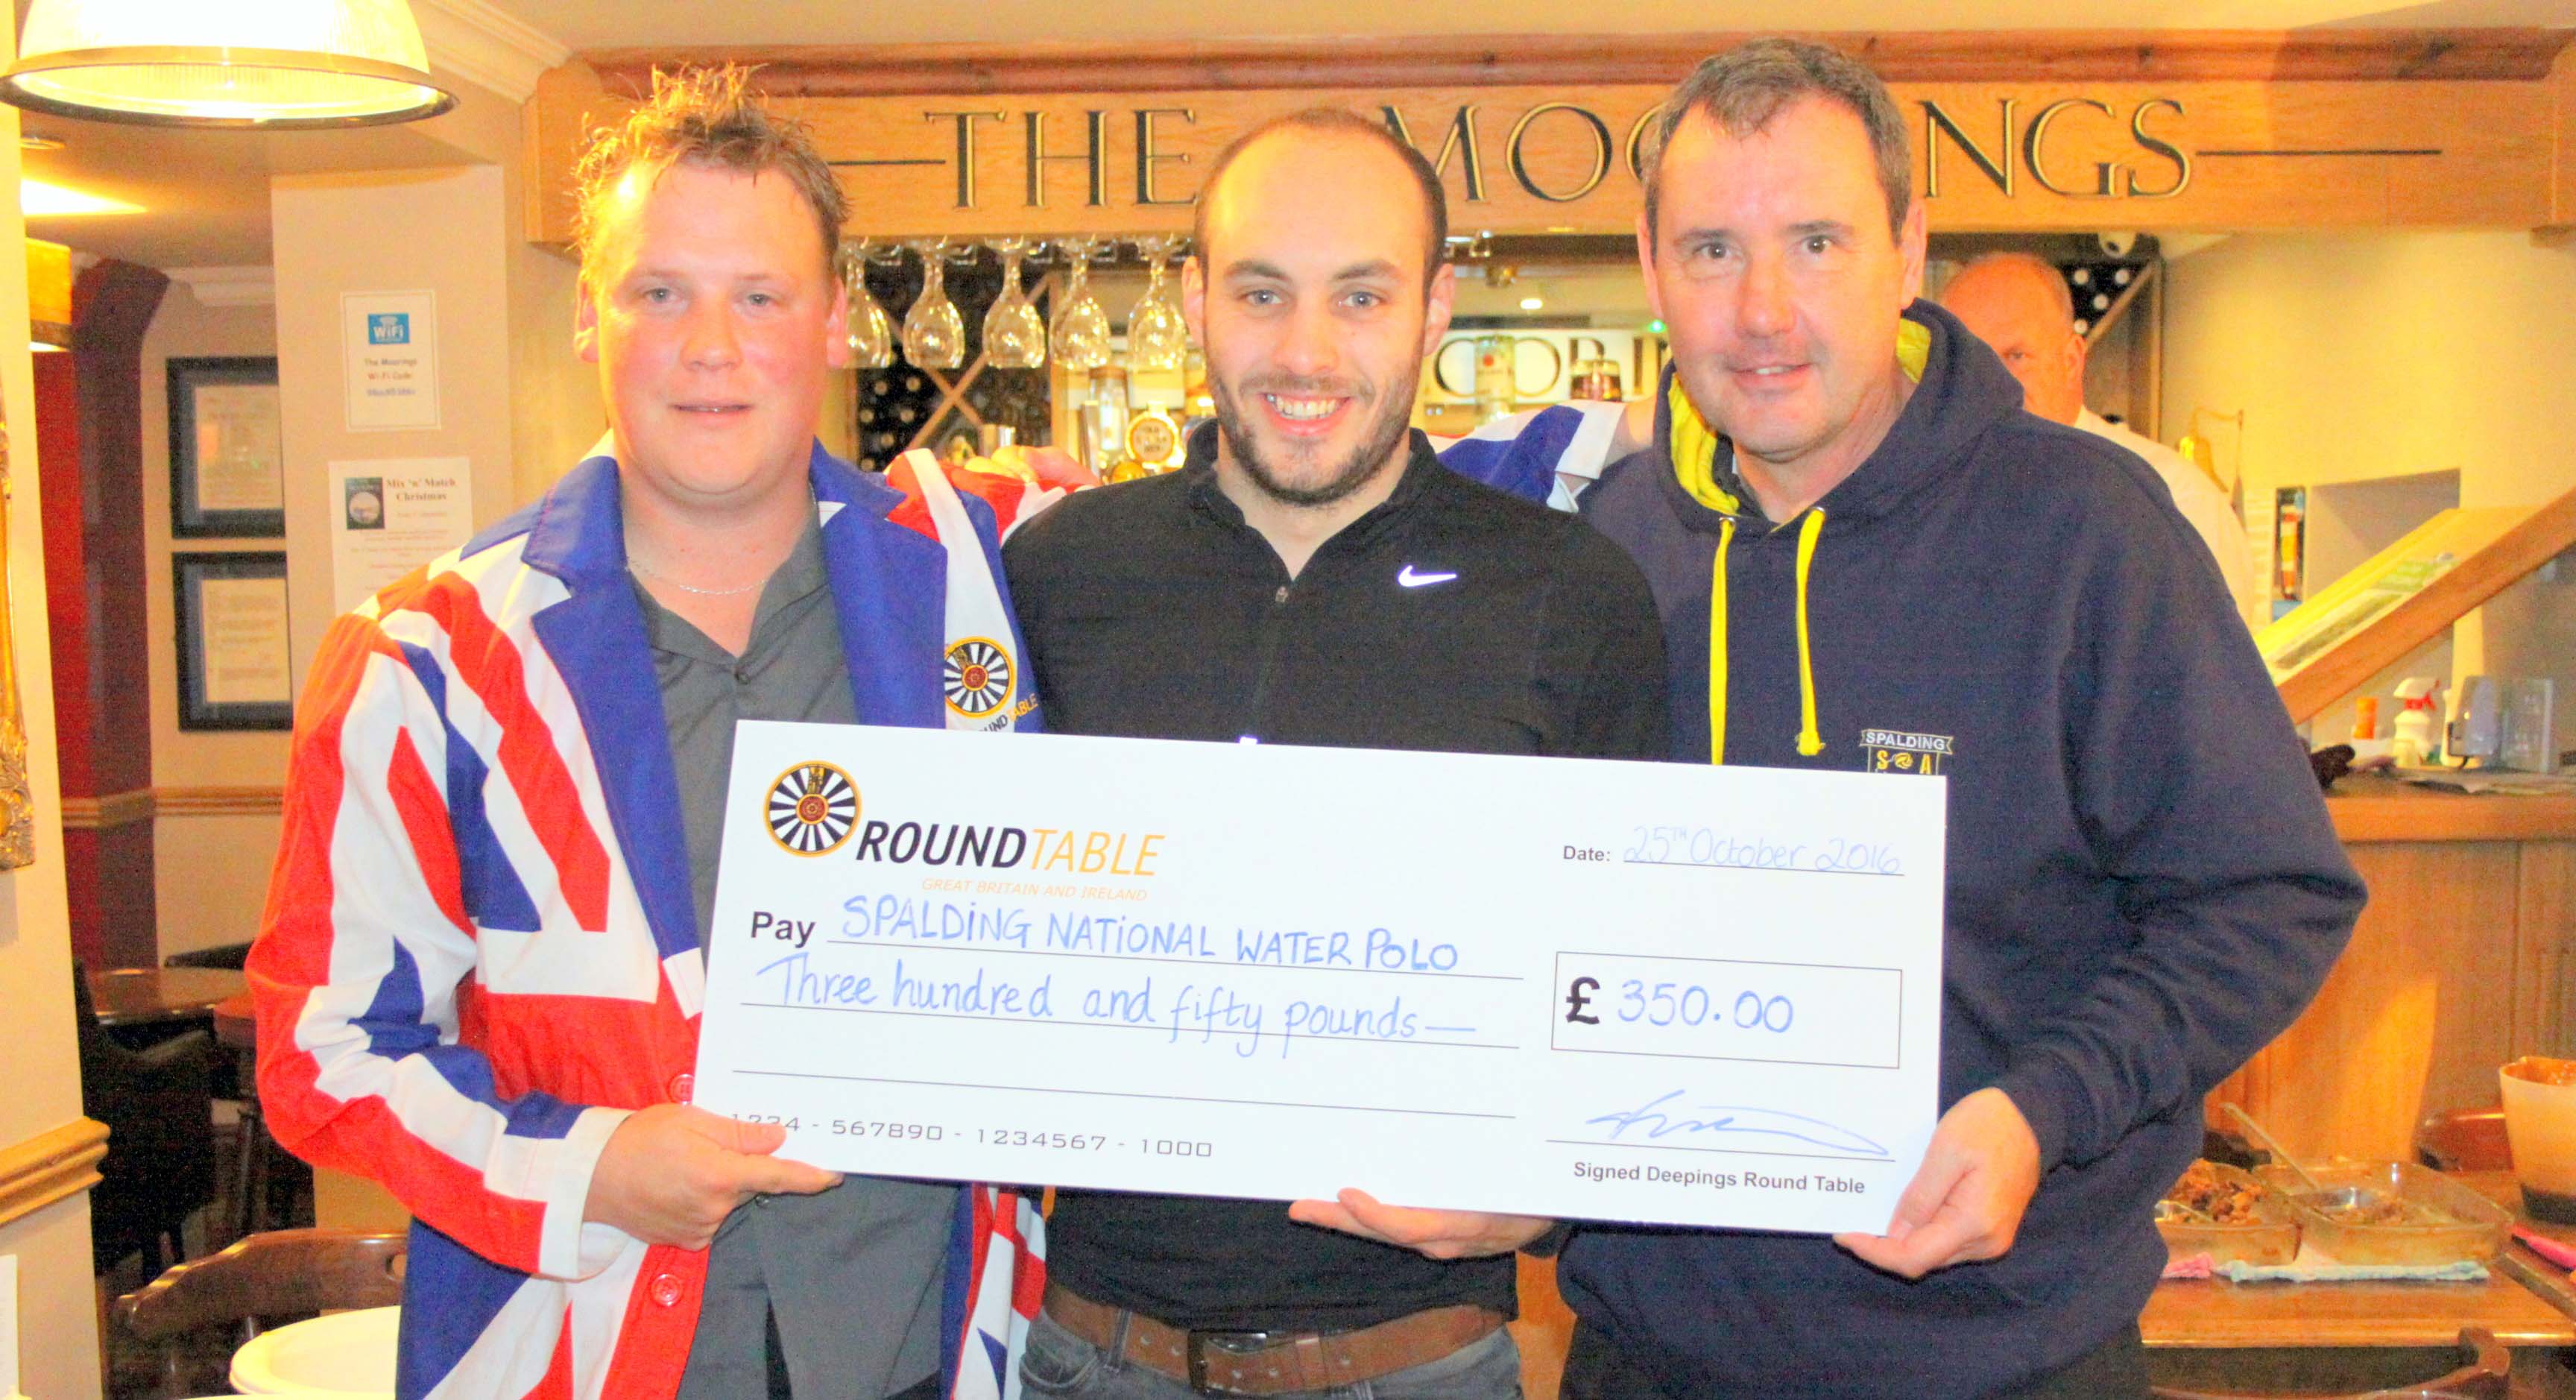 GENEROUS GIFT: Spalding captain Ben Masters (centre) and head coach Dave Lord (right) receive £350.